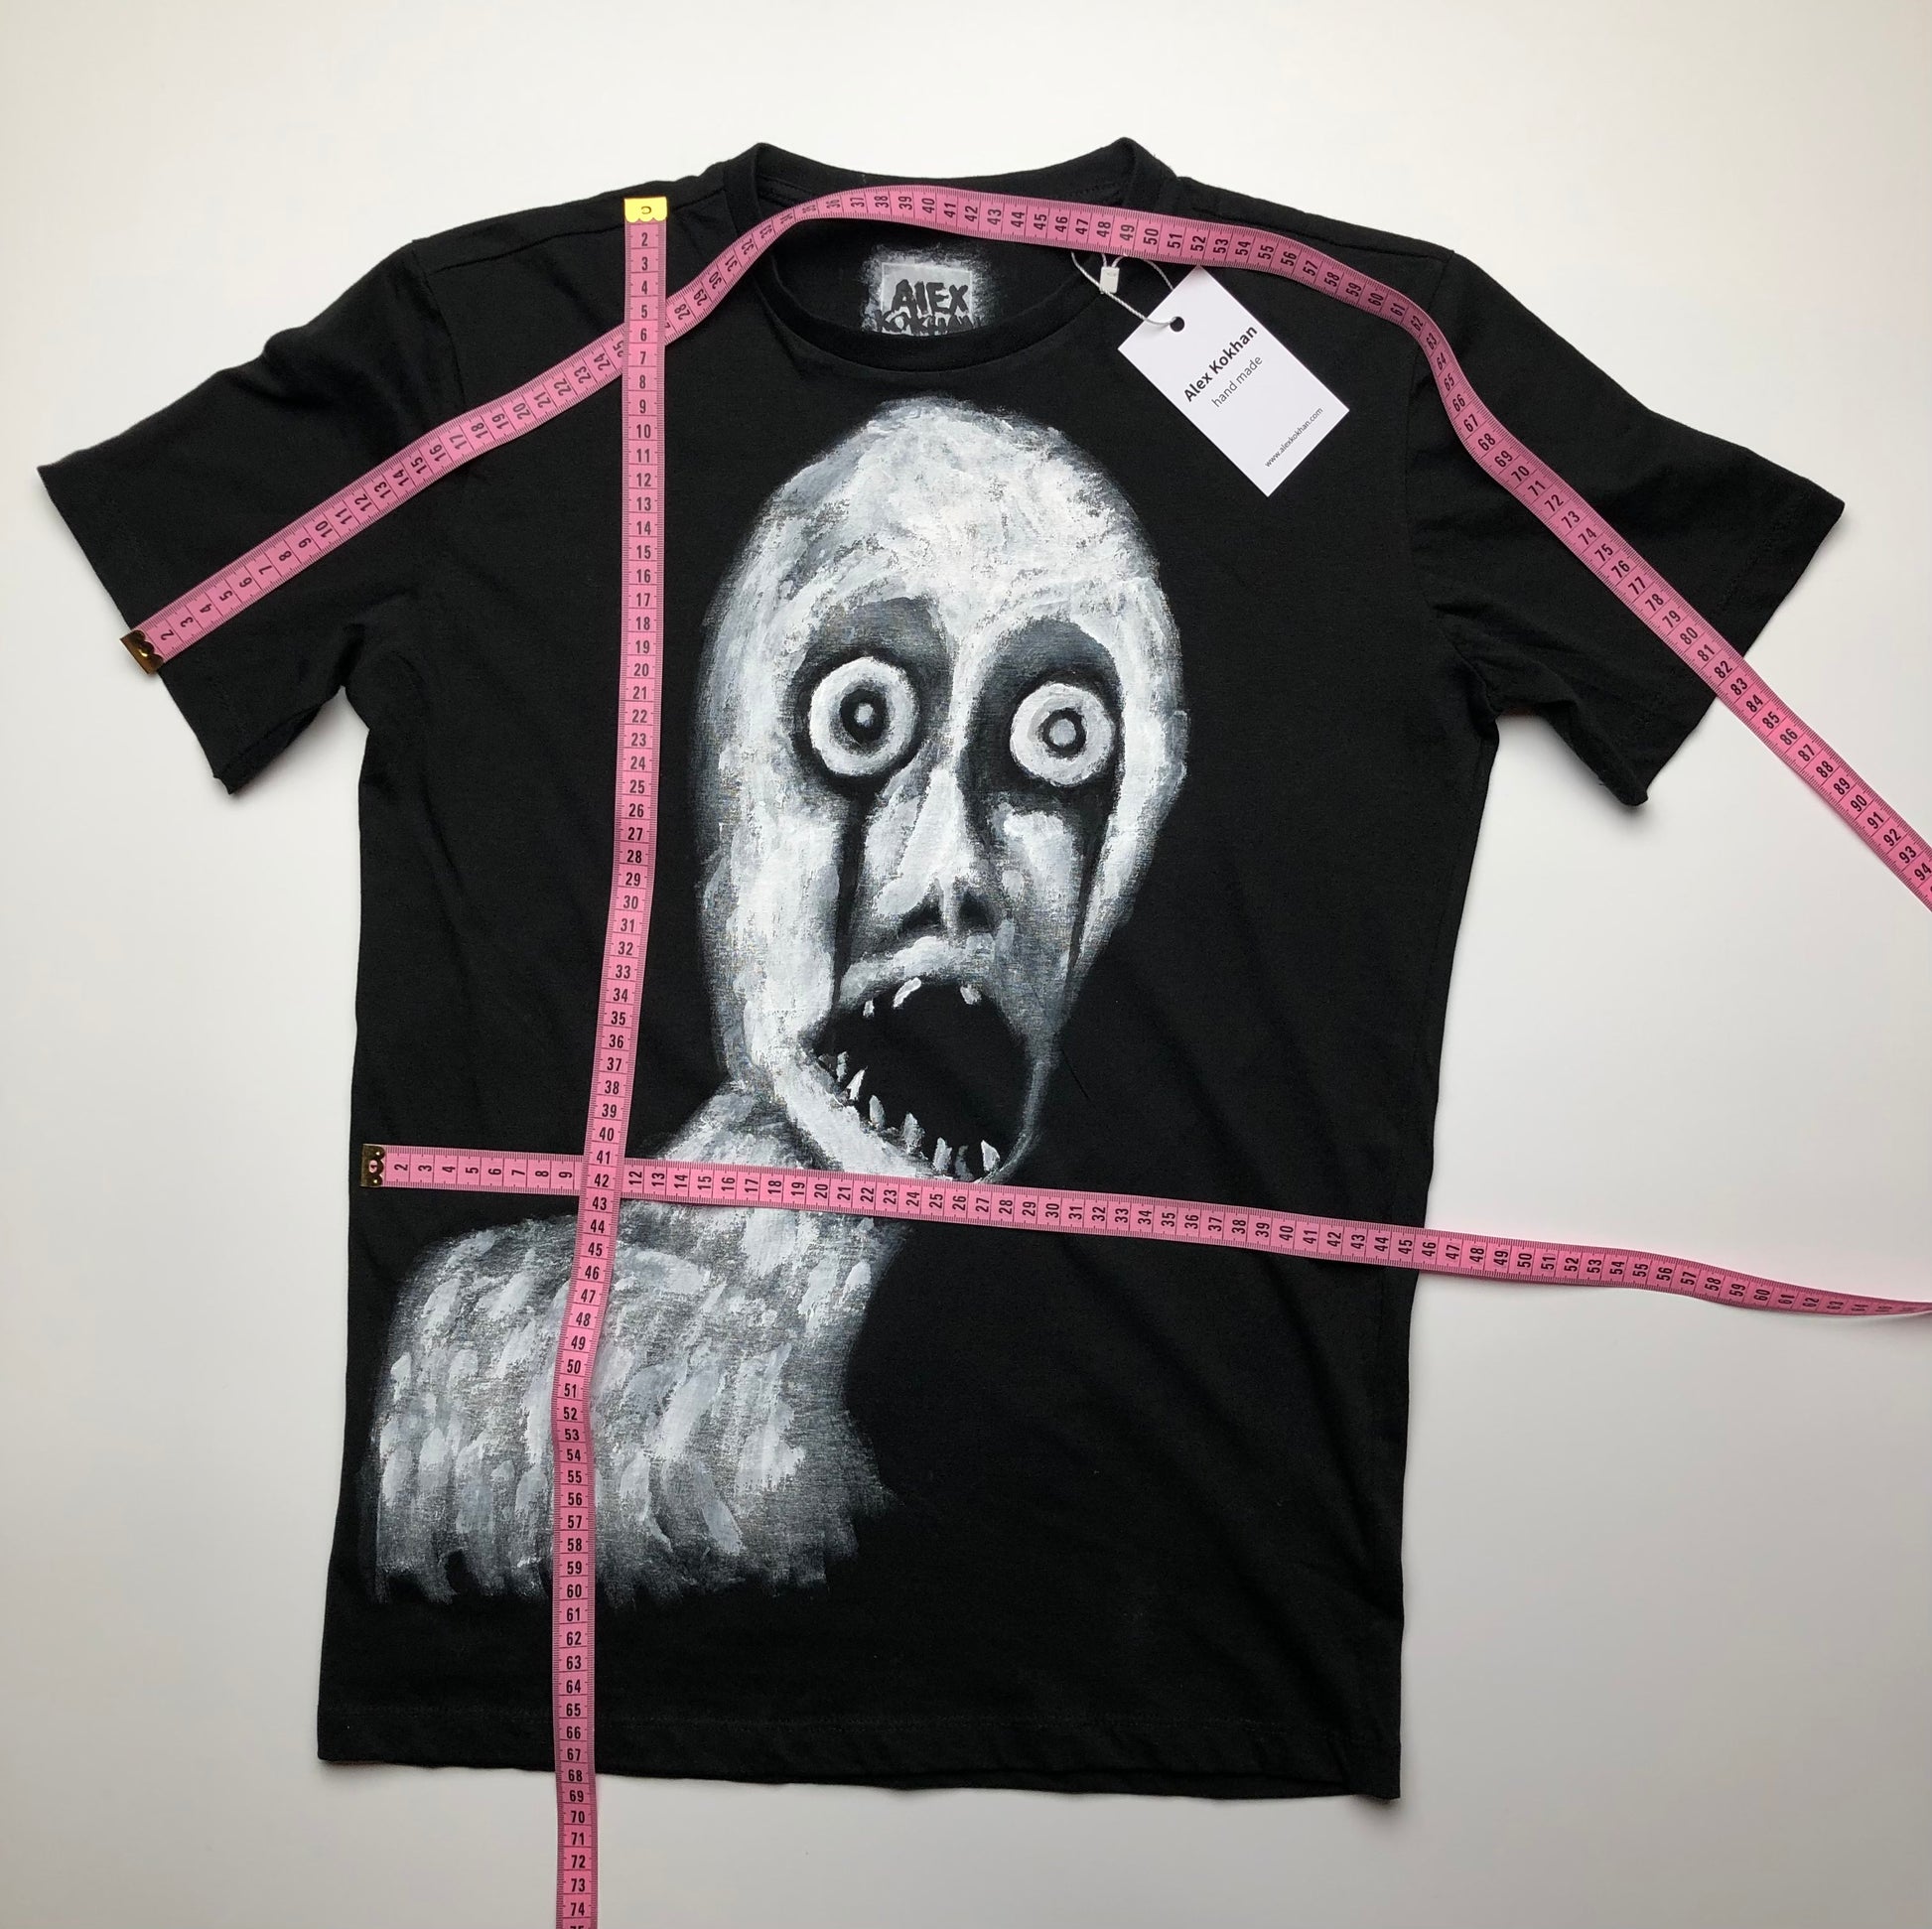 scp 096 Picture , scp 096 face | Essential T-Shirt